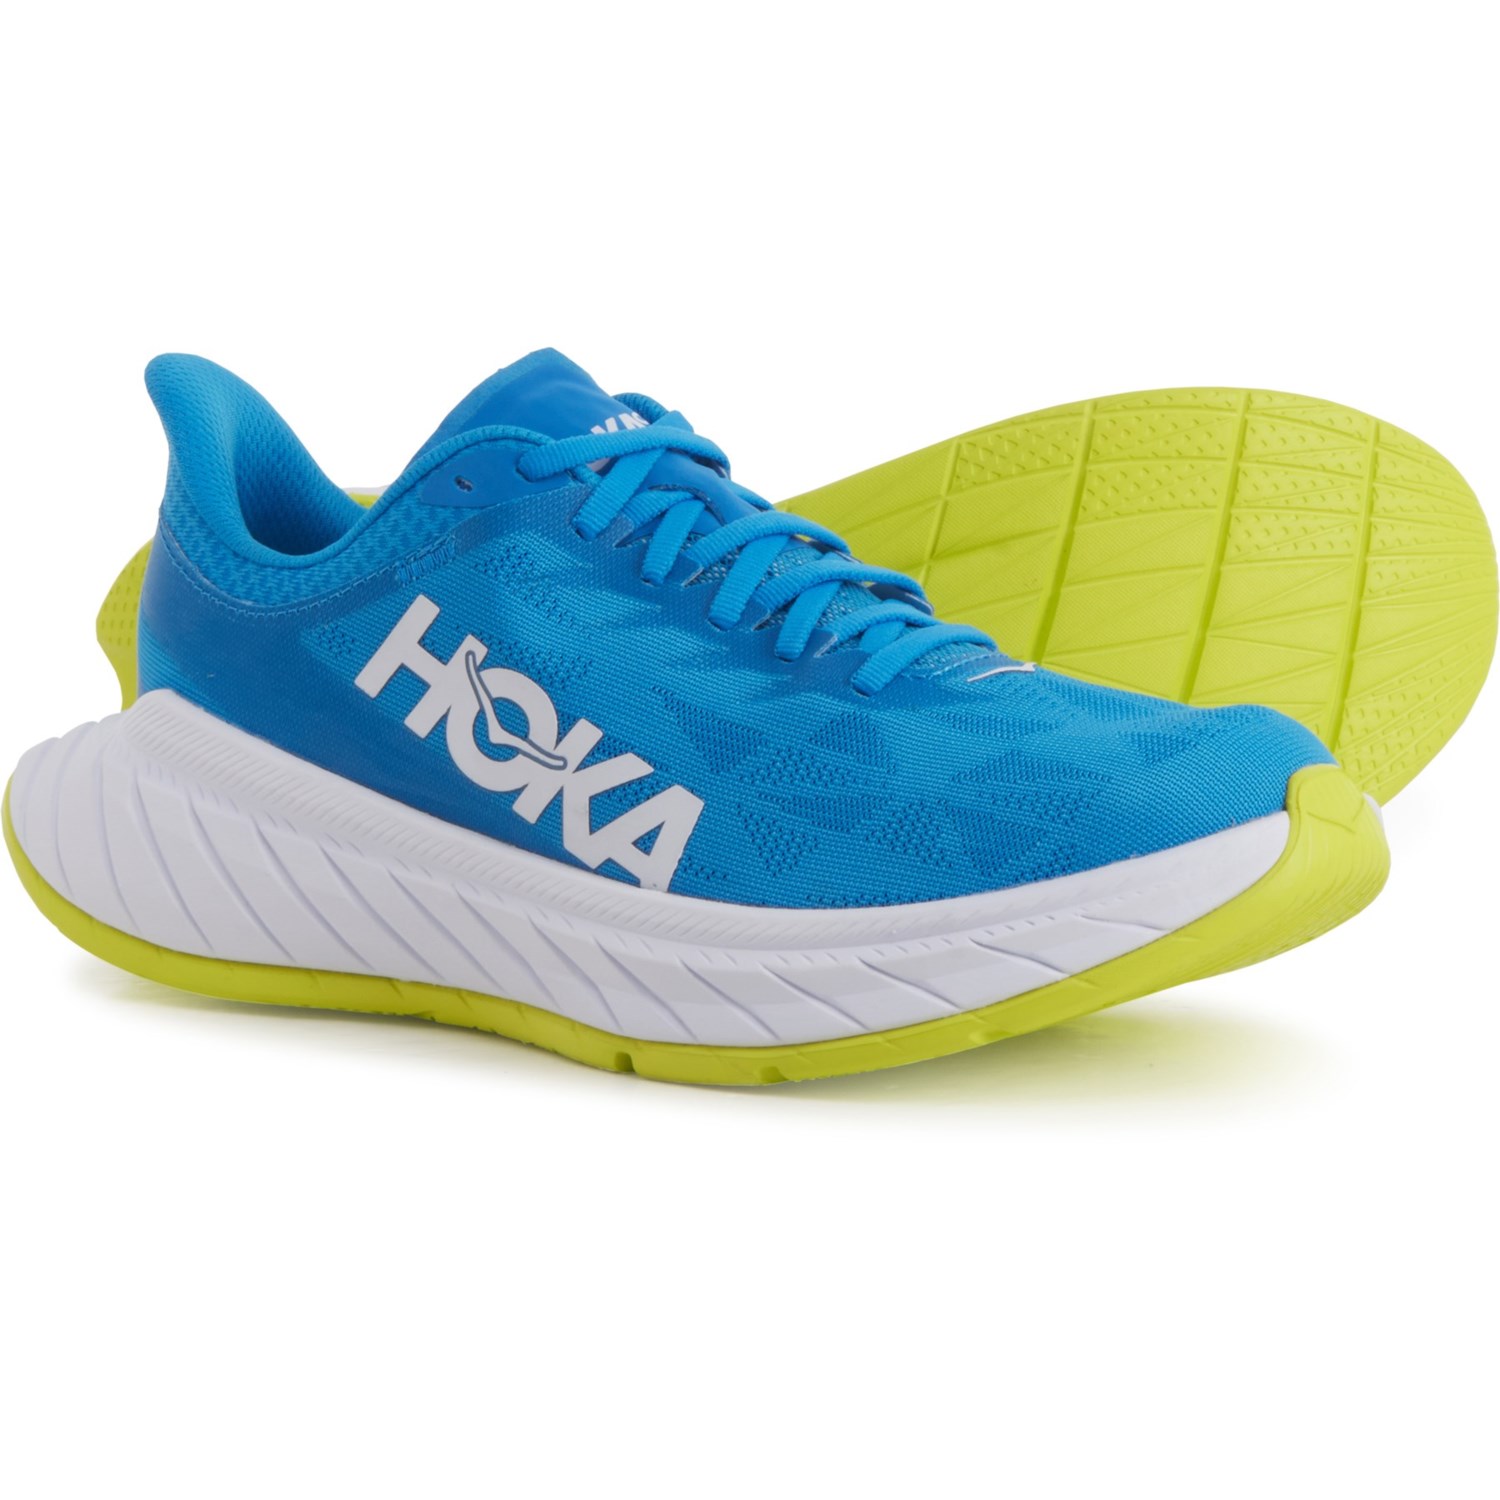 HOKA Carbon X 2 Running Shoes (For Women) - Save 20%